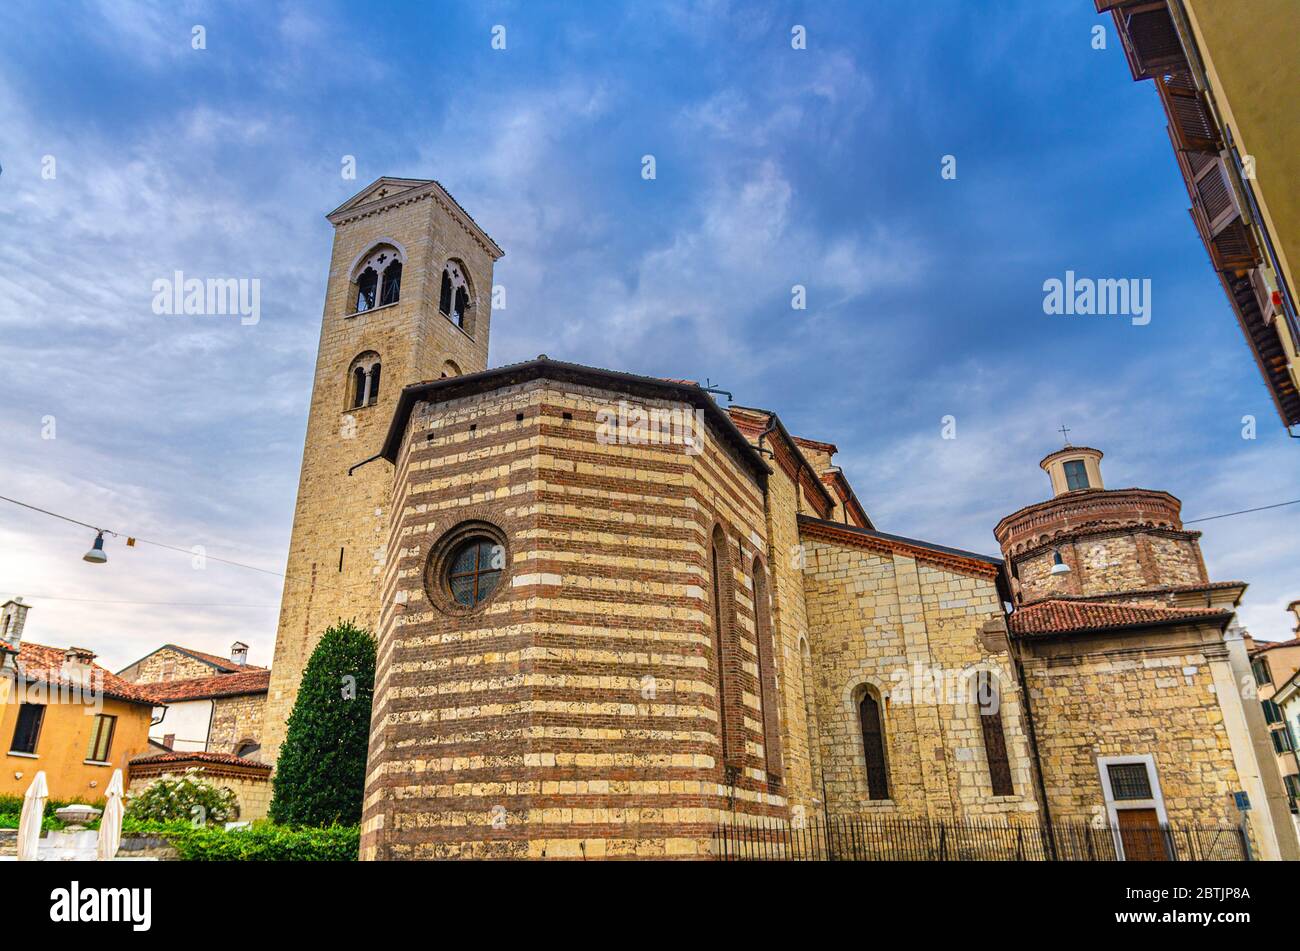 Chiesa Di San Francesco D Assisi Roman Catholic Church Romanesque Gothic Style Building And Franciscan Monastery Brescia City Historical Centre Italian Churches Lombardy Northern Italy Stock Photo Alamy